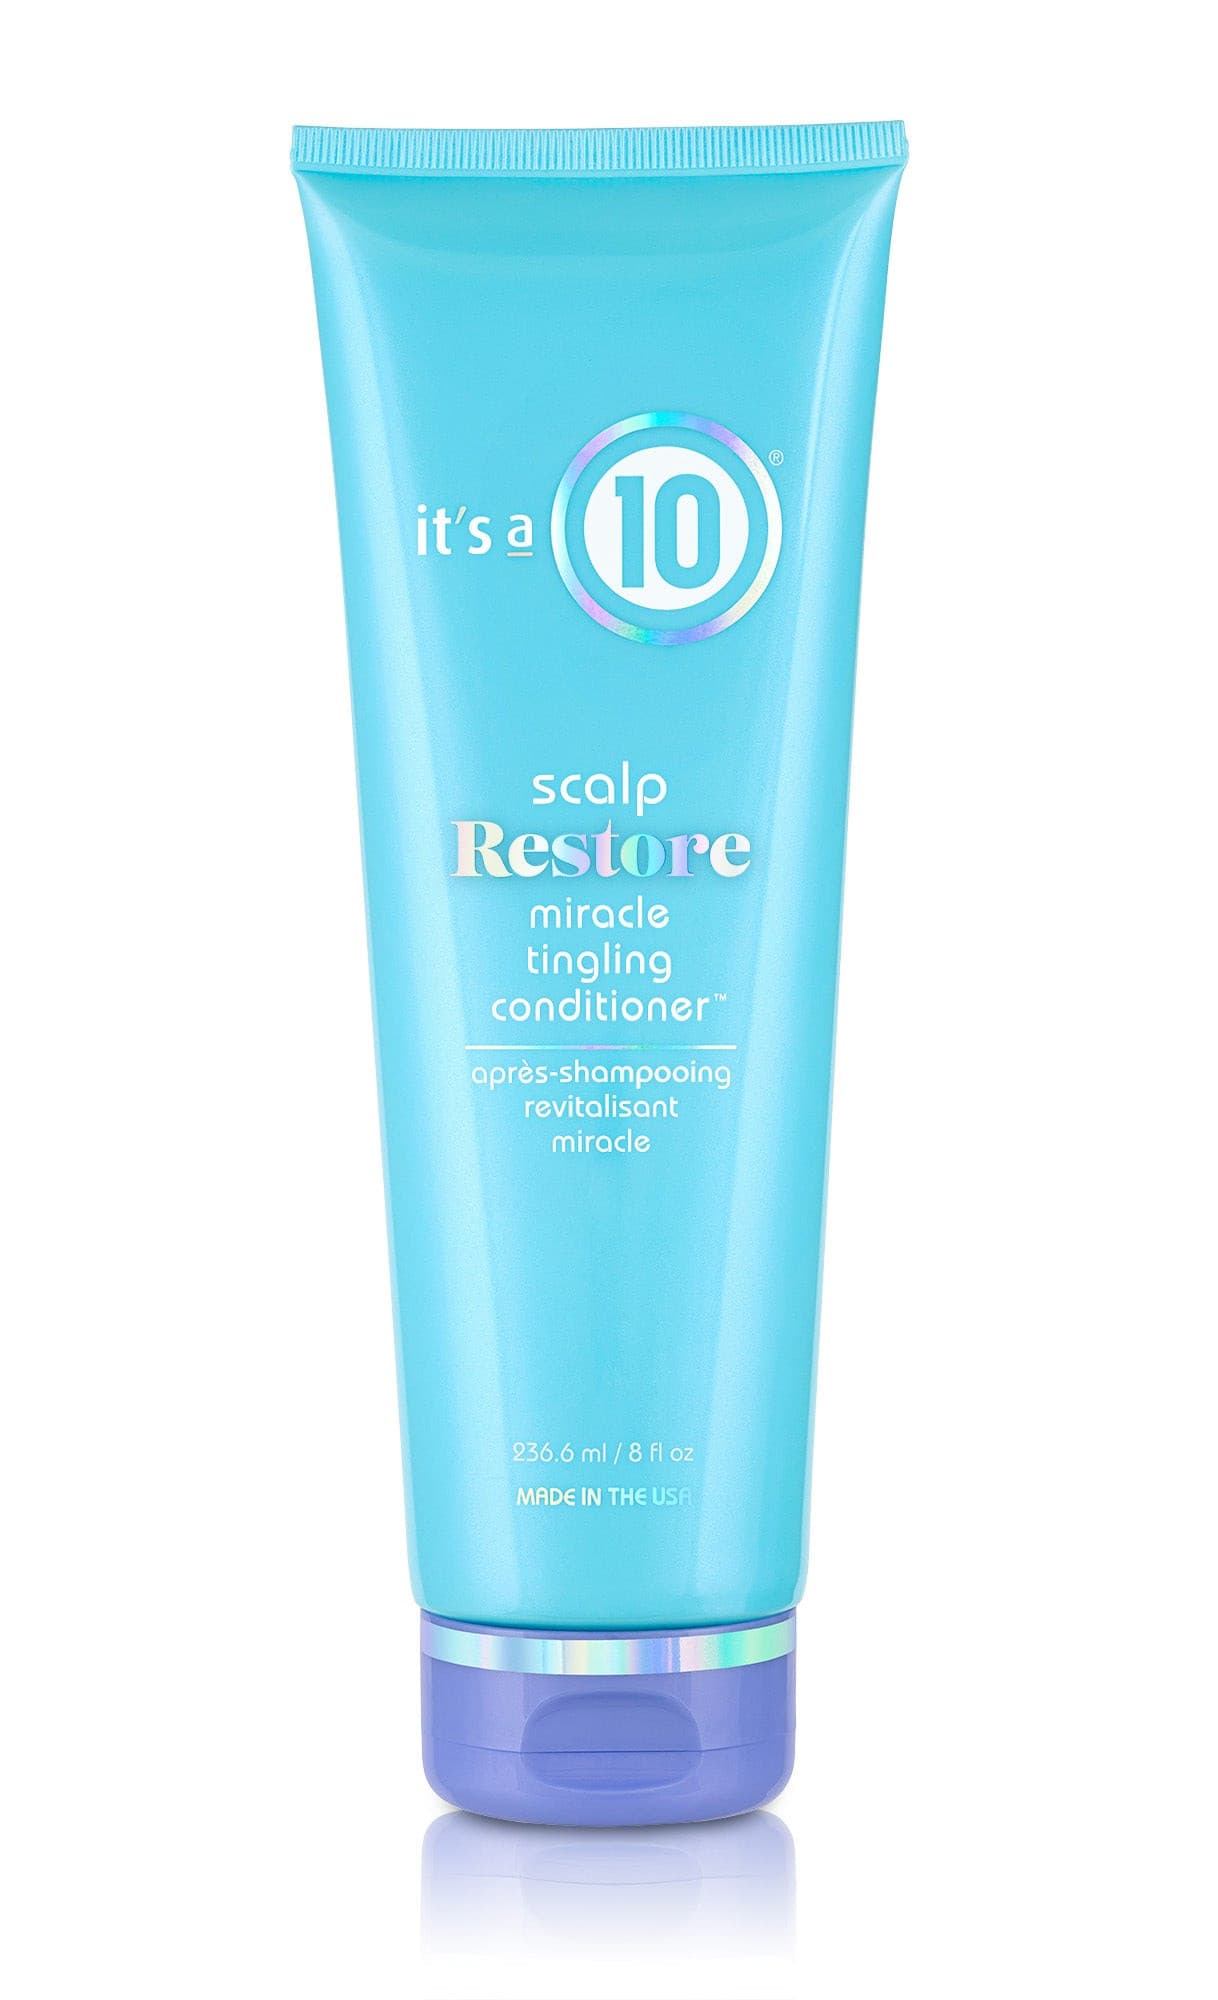 It’s a 10 Scalp Restore Miracle Tingling Conditioner